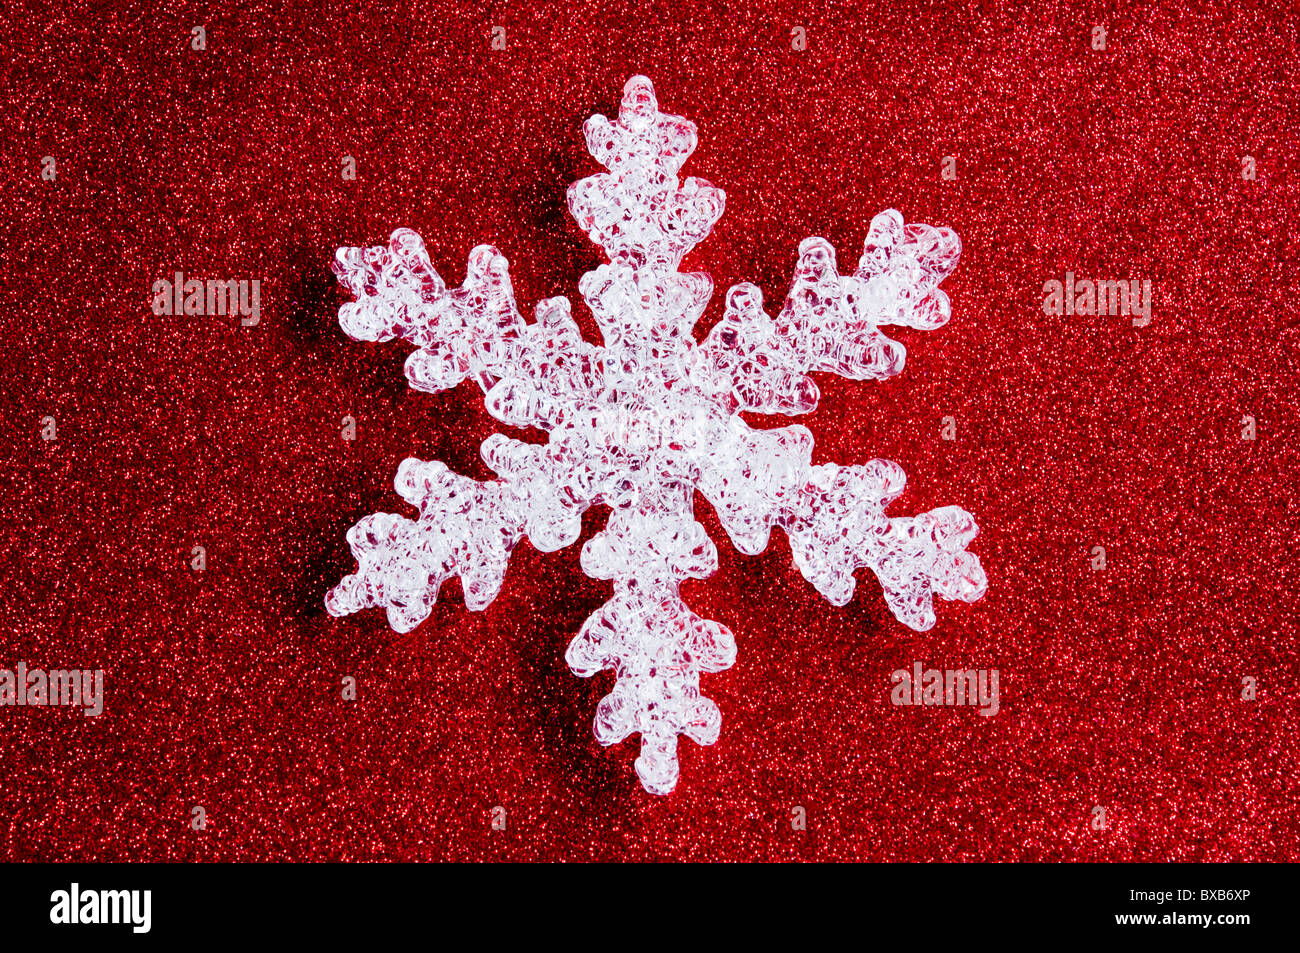 Snowflake with red glittery background. Stock Photo